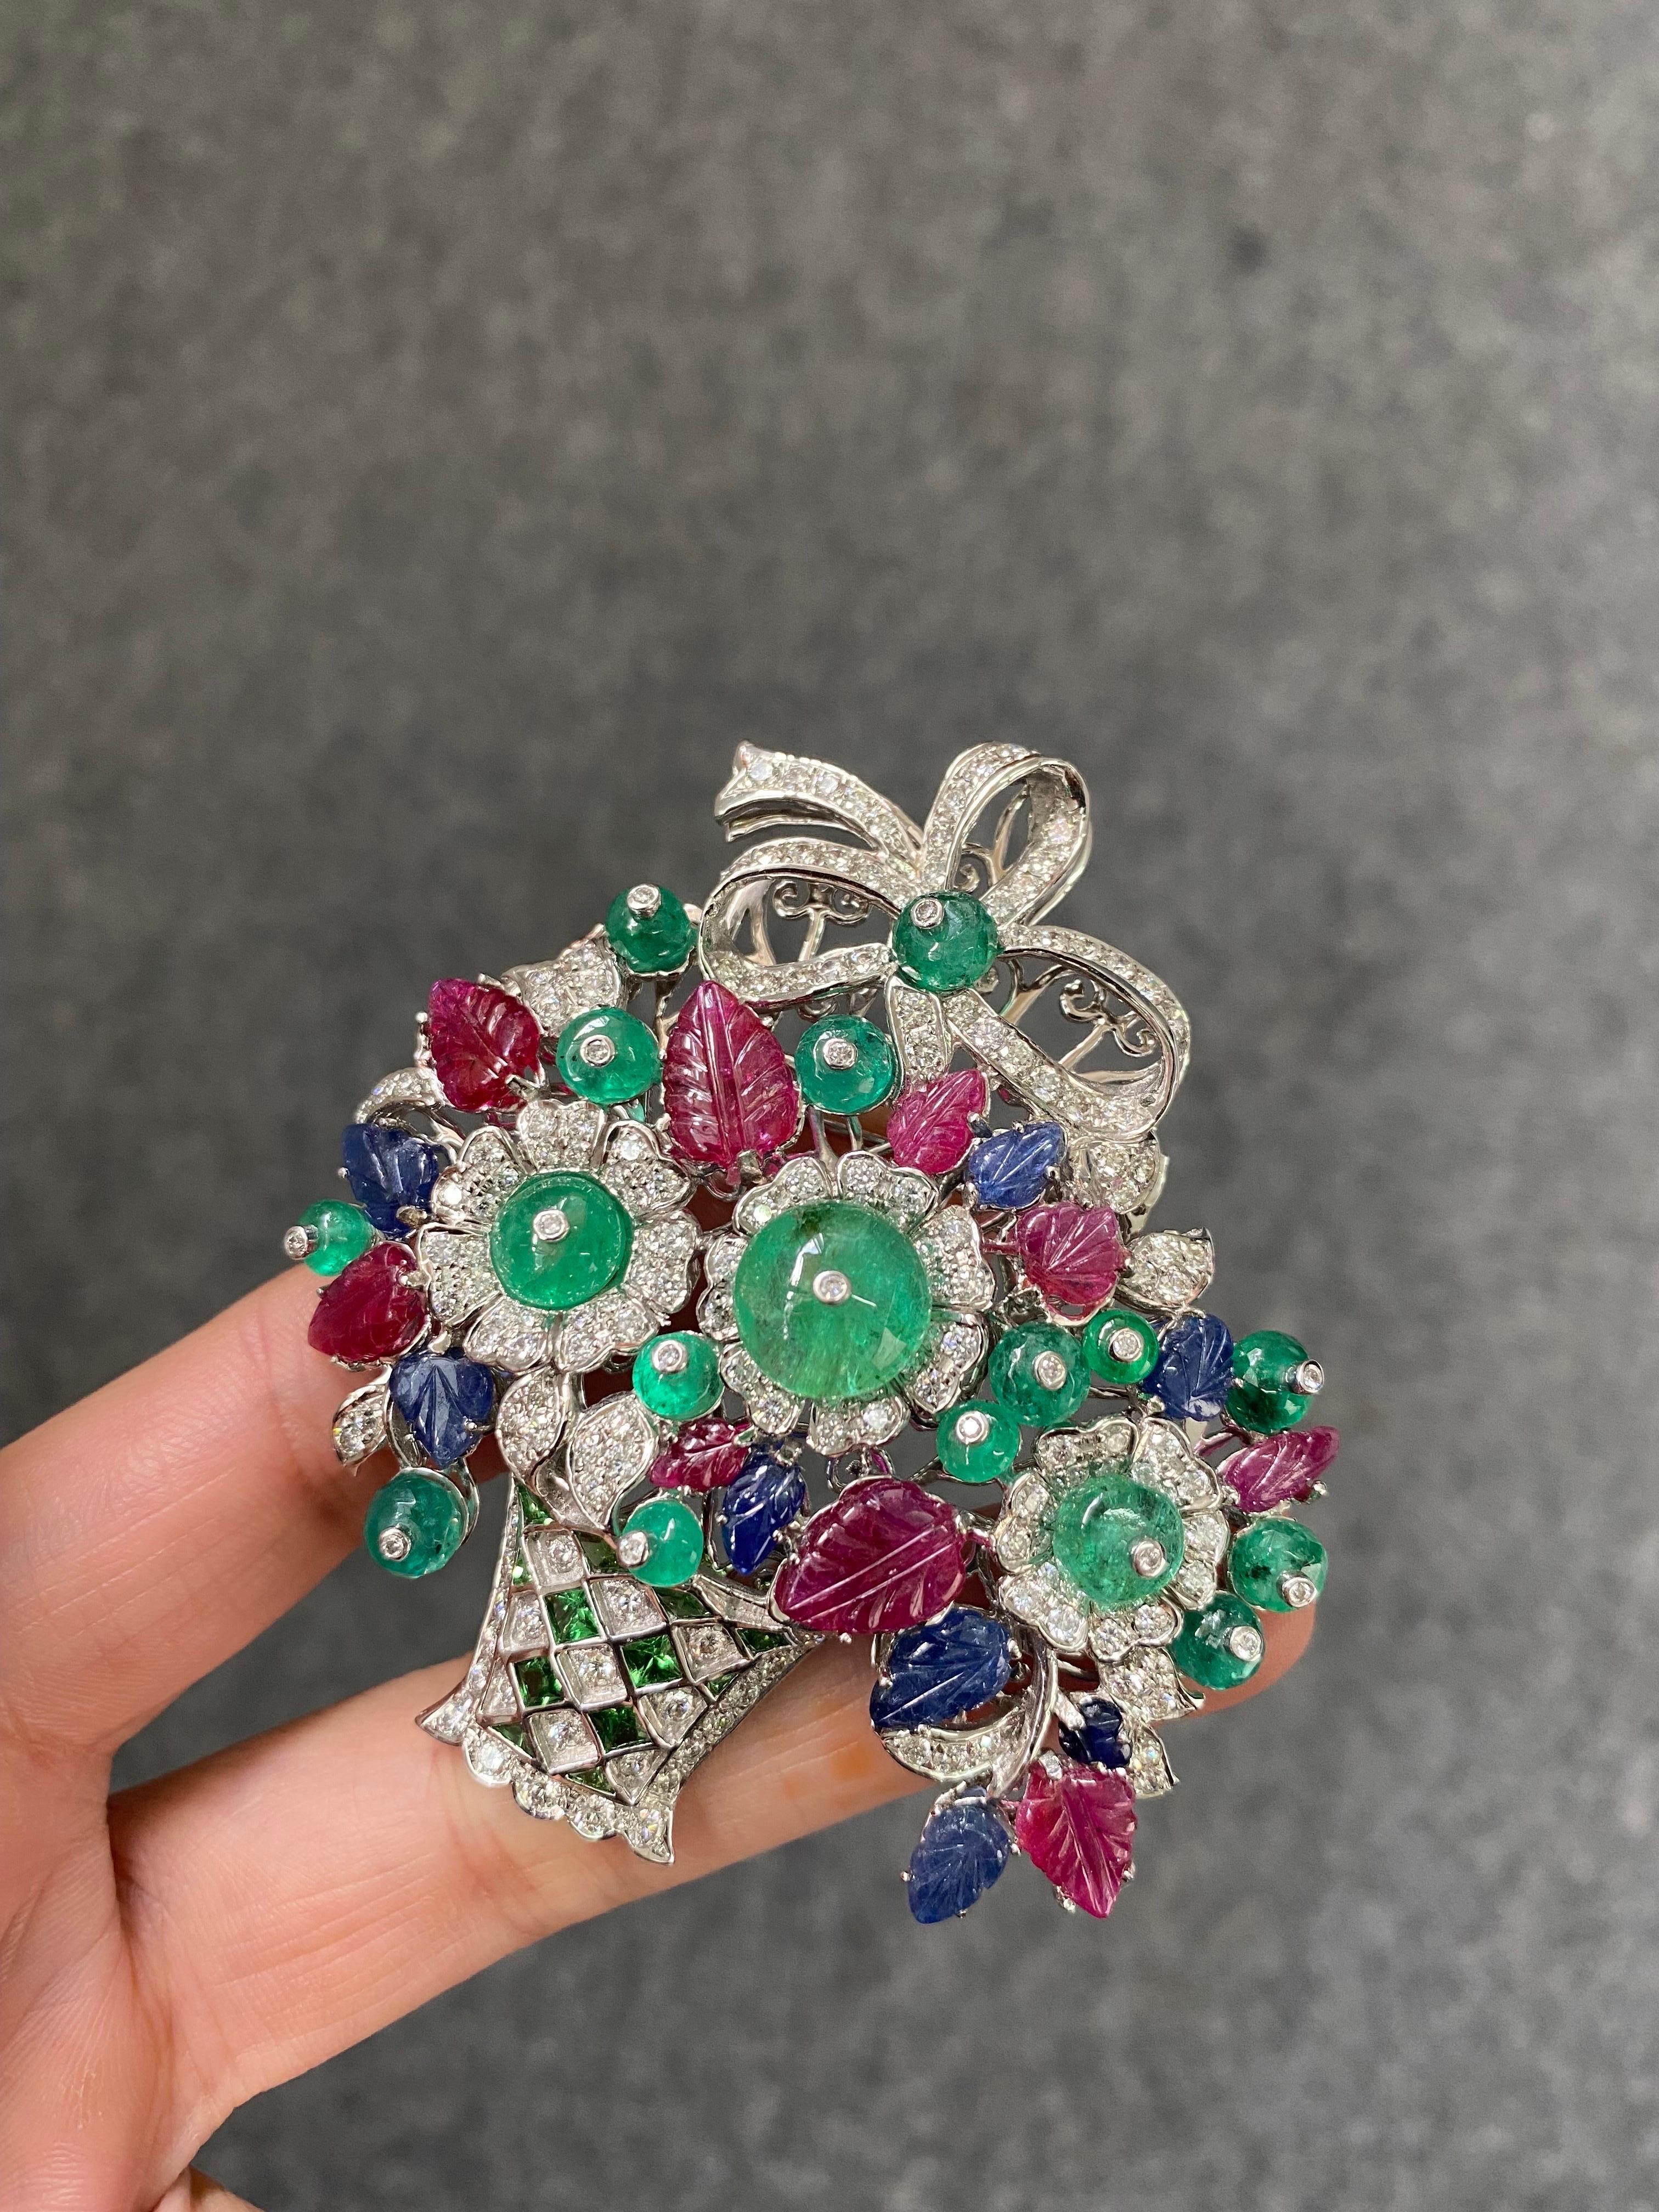 A beautiful art-deco inspired tutti frutti brooch depicting a flower vase, with 10.70 carat natural Ruby, 5.49 carat natural Sapphire and 18.05 carat natural Emeralds with 4.3 carats of White Diamonds all set in solid 18K White Gold. 
We provide